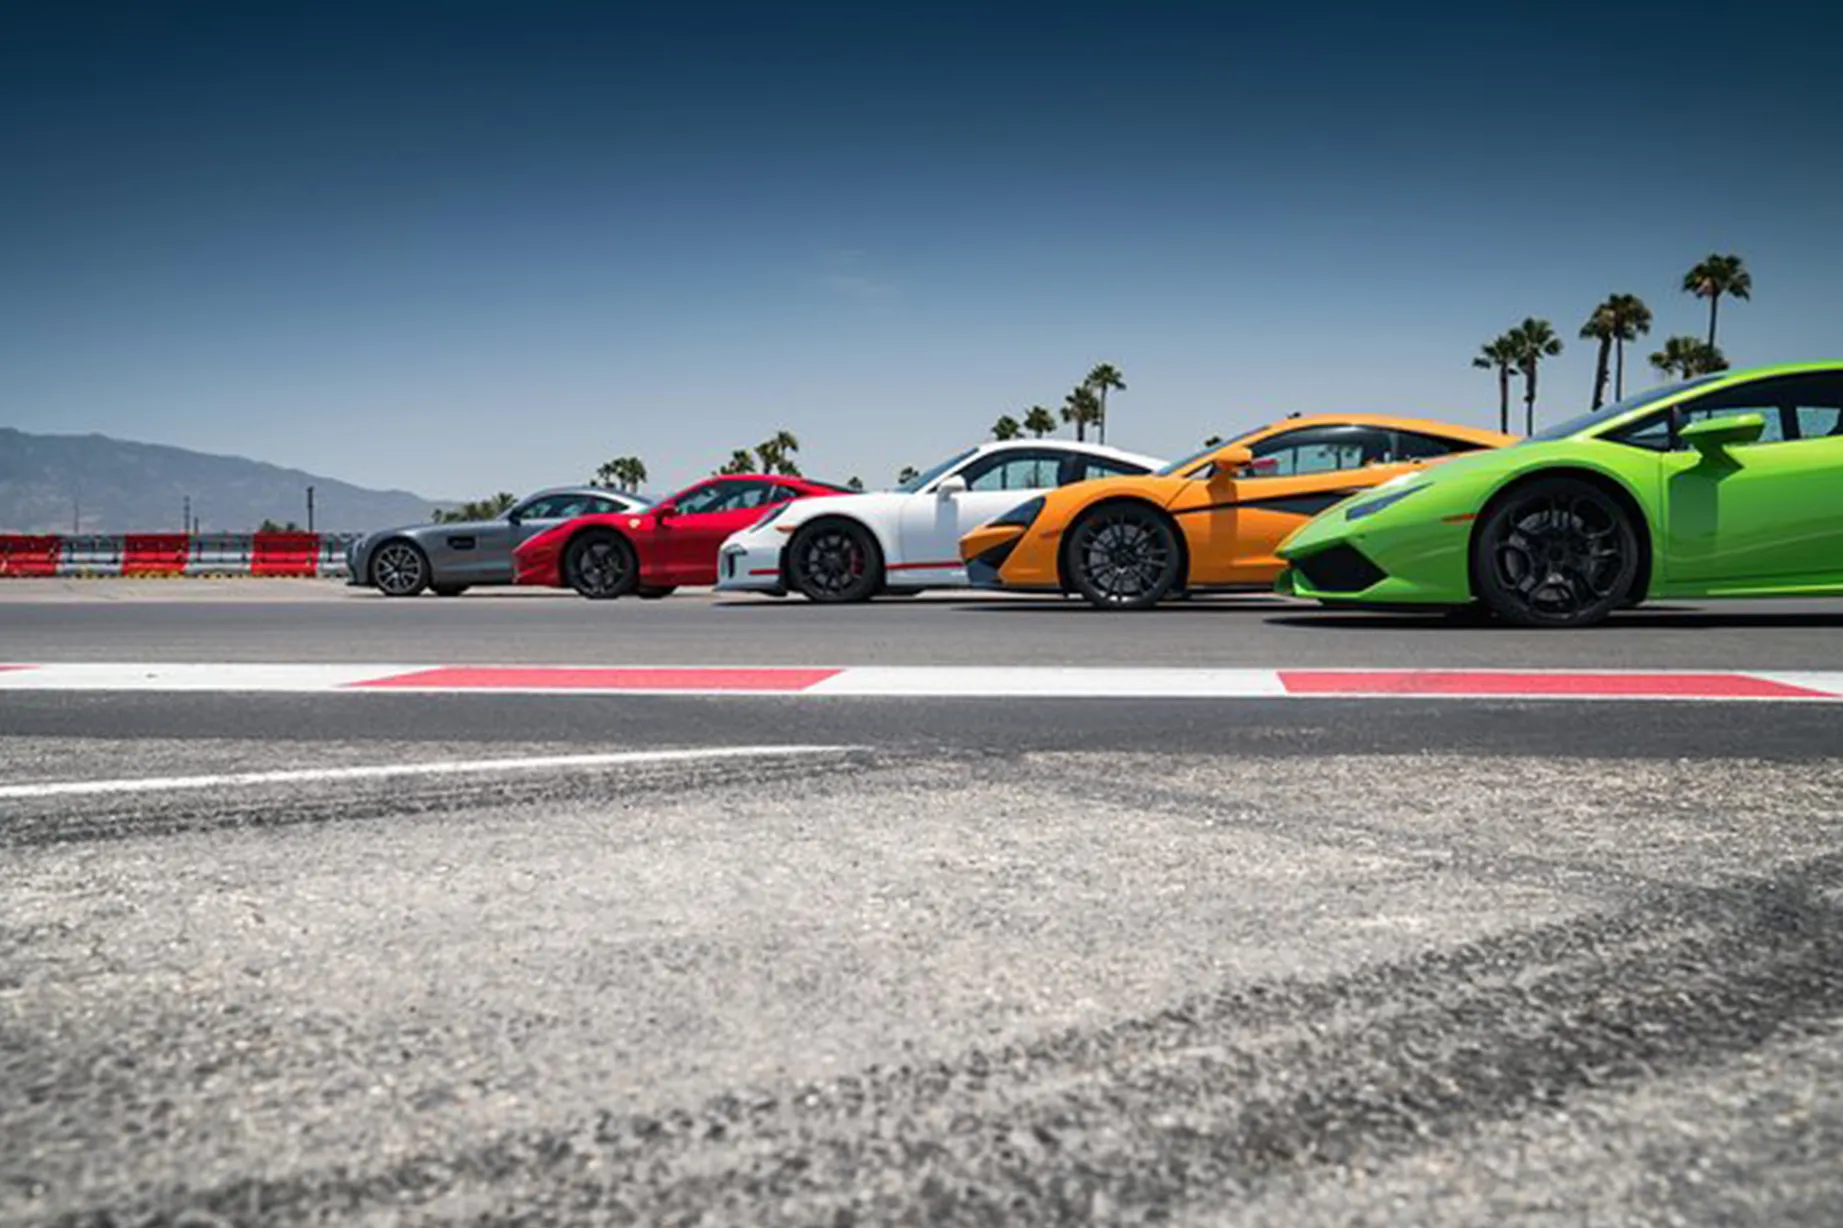 Enjoy a track day in Las Vegas during the 2023 F1 Grand Prix